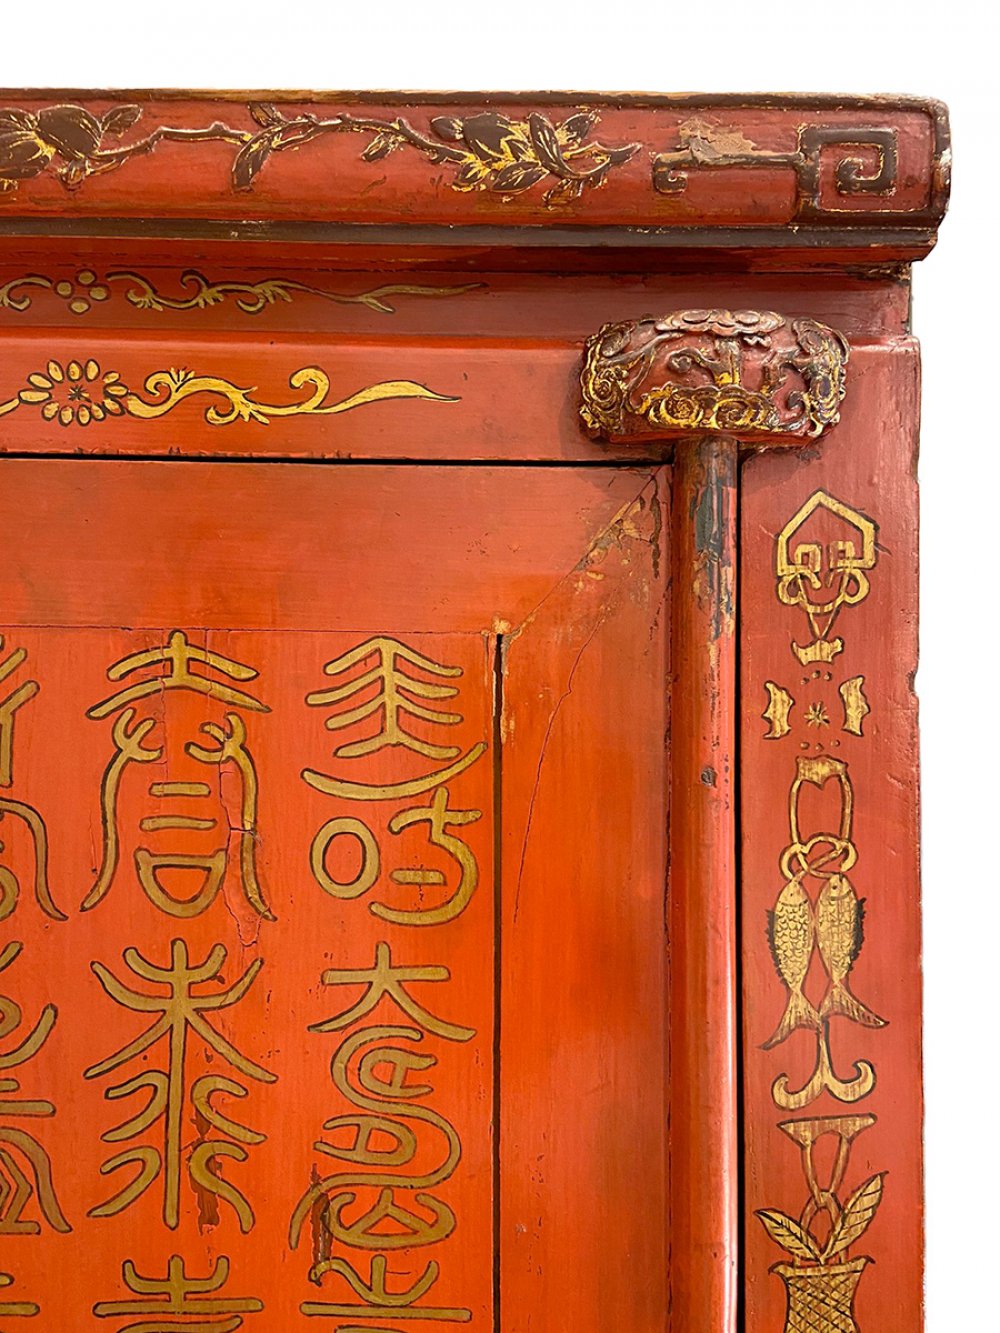 Cabinet. China, late 19th-early 20th century.Red lacquered elm wood with hand-decorated gold dust. - Image 3 of 7